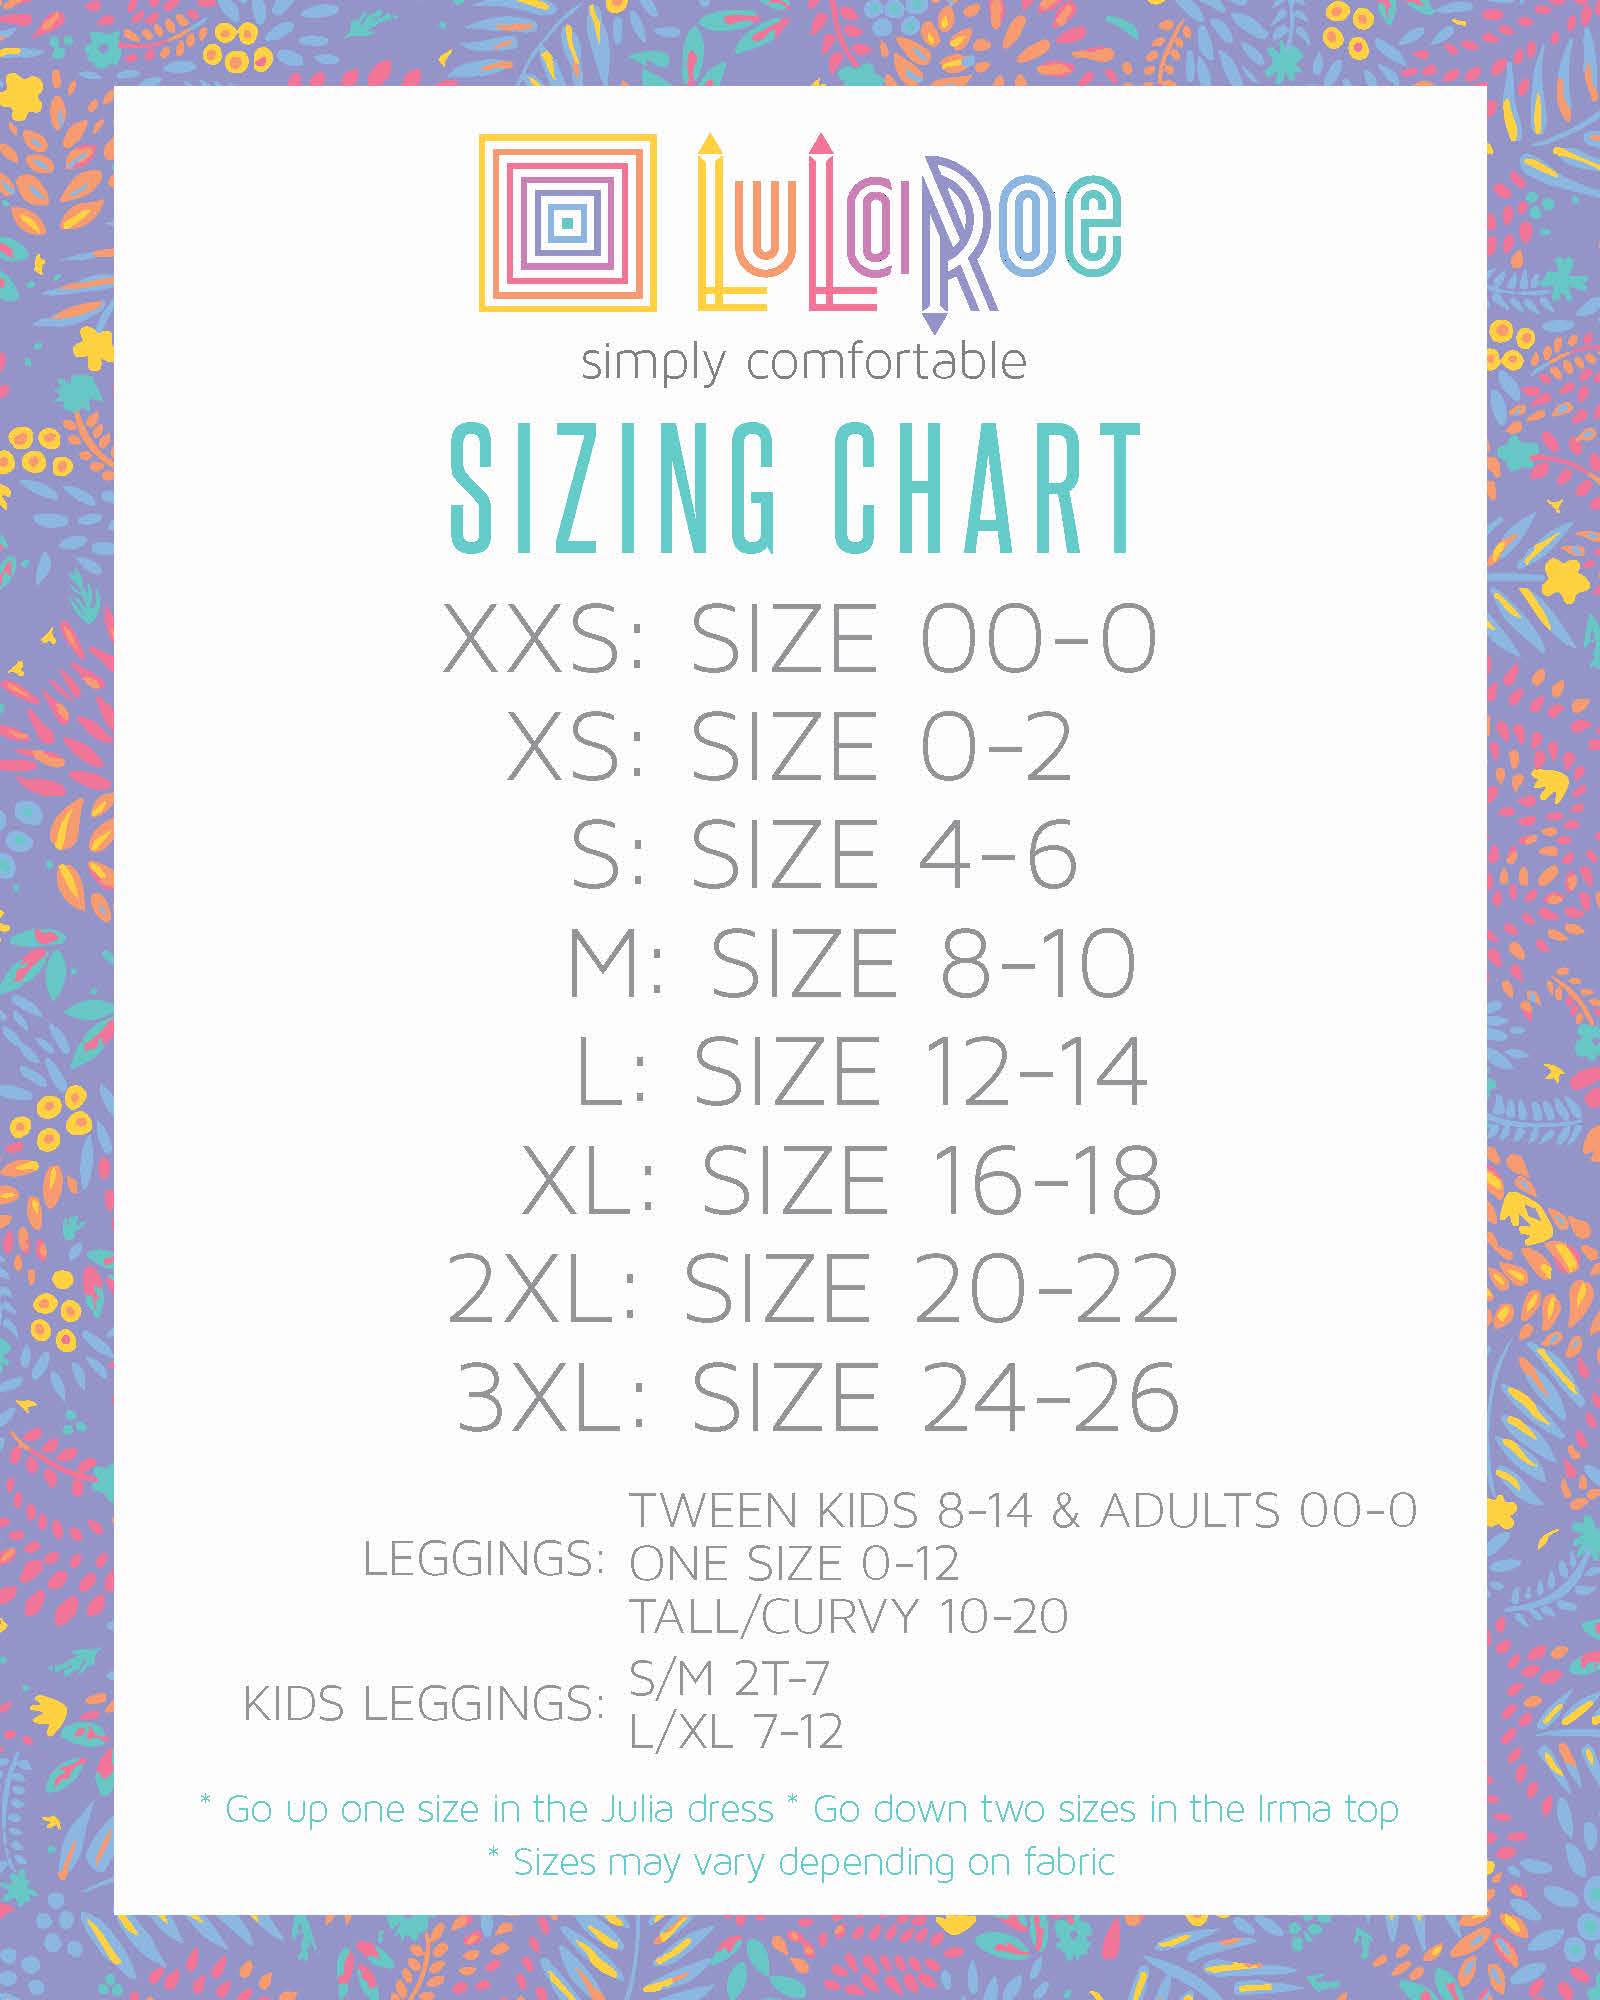 All of the Lularoe is unpacked! - You Name It Resale